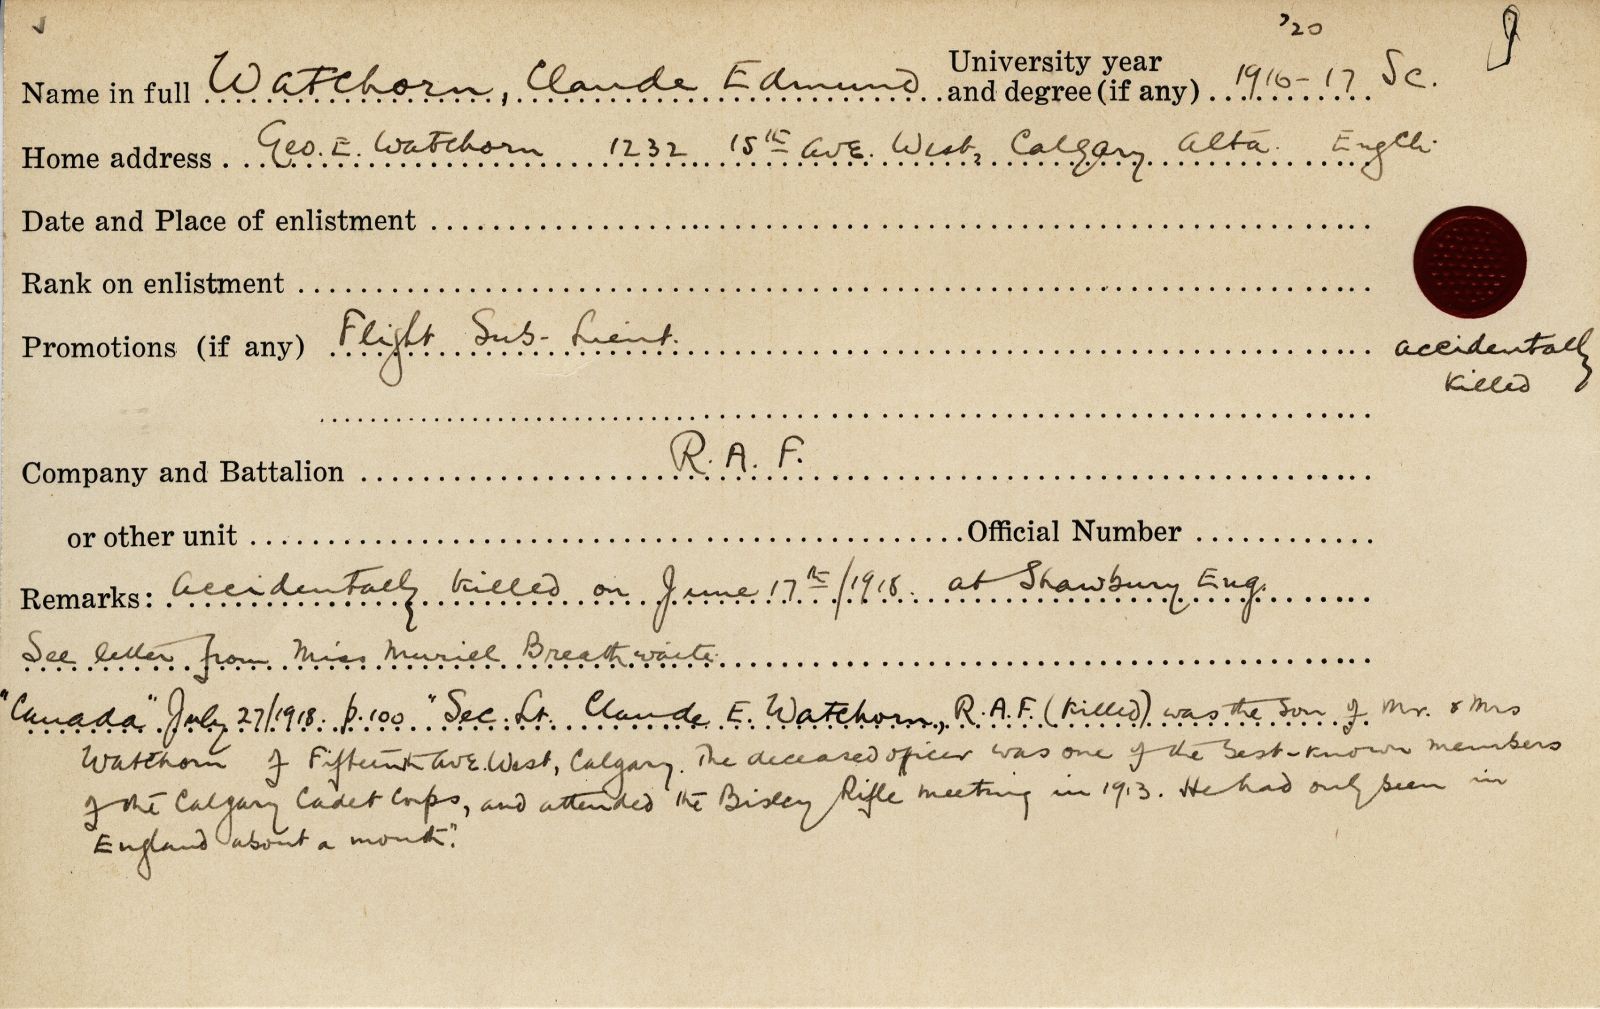 University Military Service Record of Watchorn